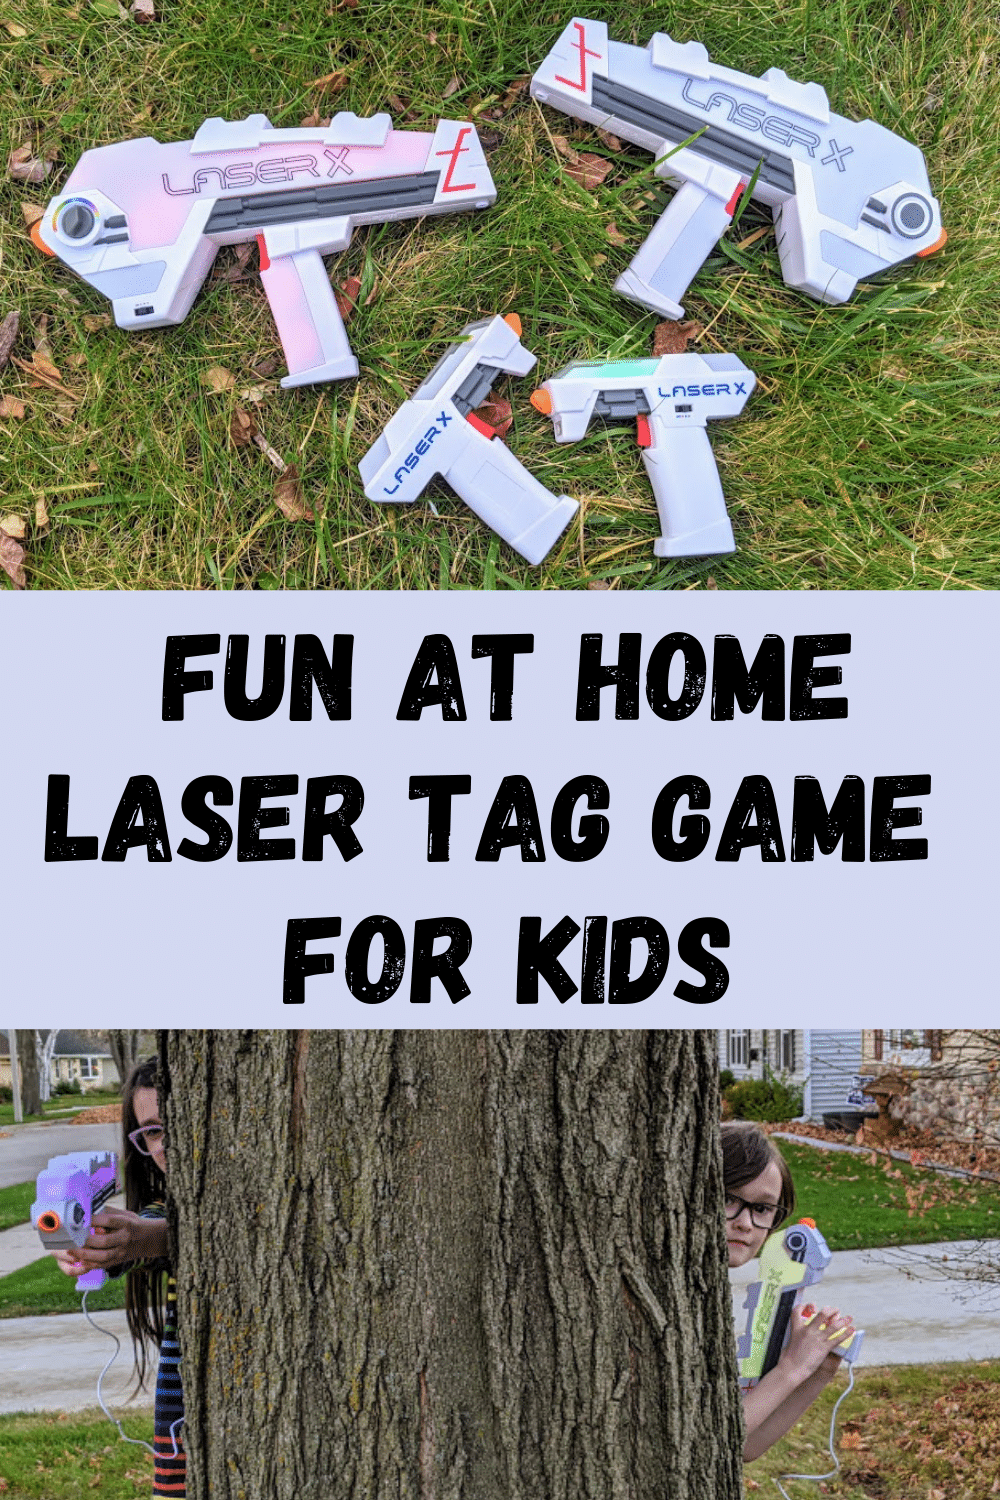 Laser X laser tag game review. Is it any good? Should I buy it?